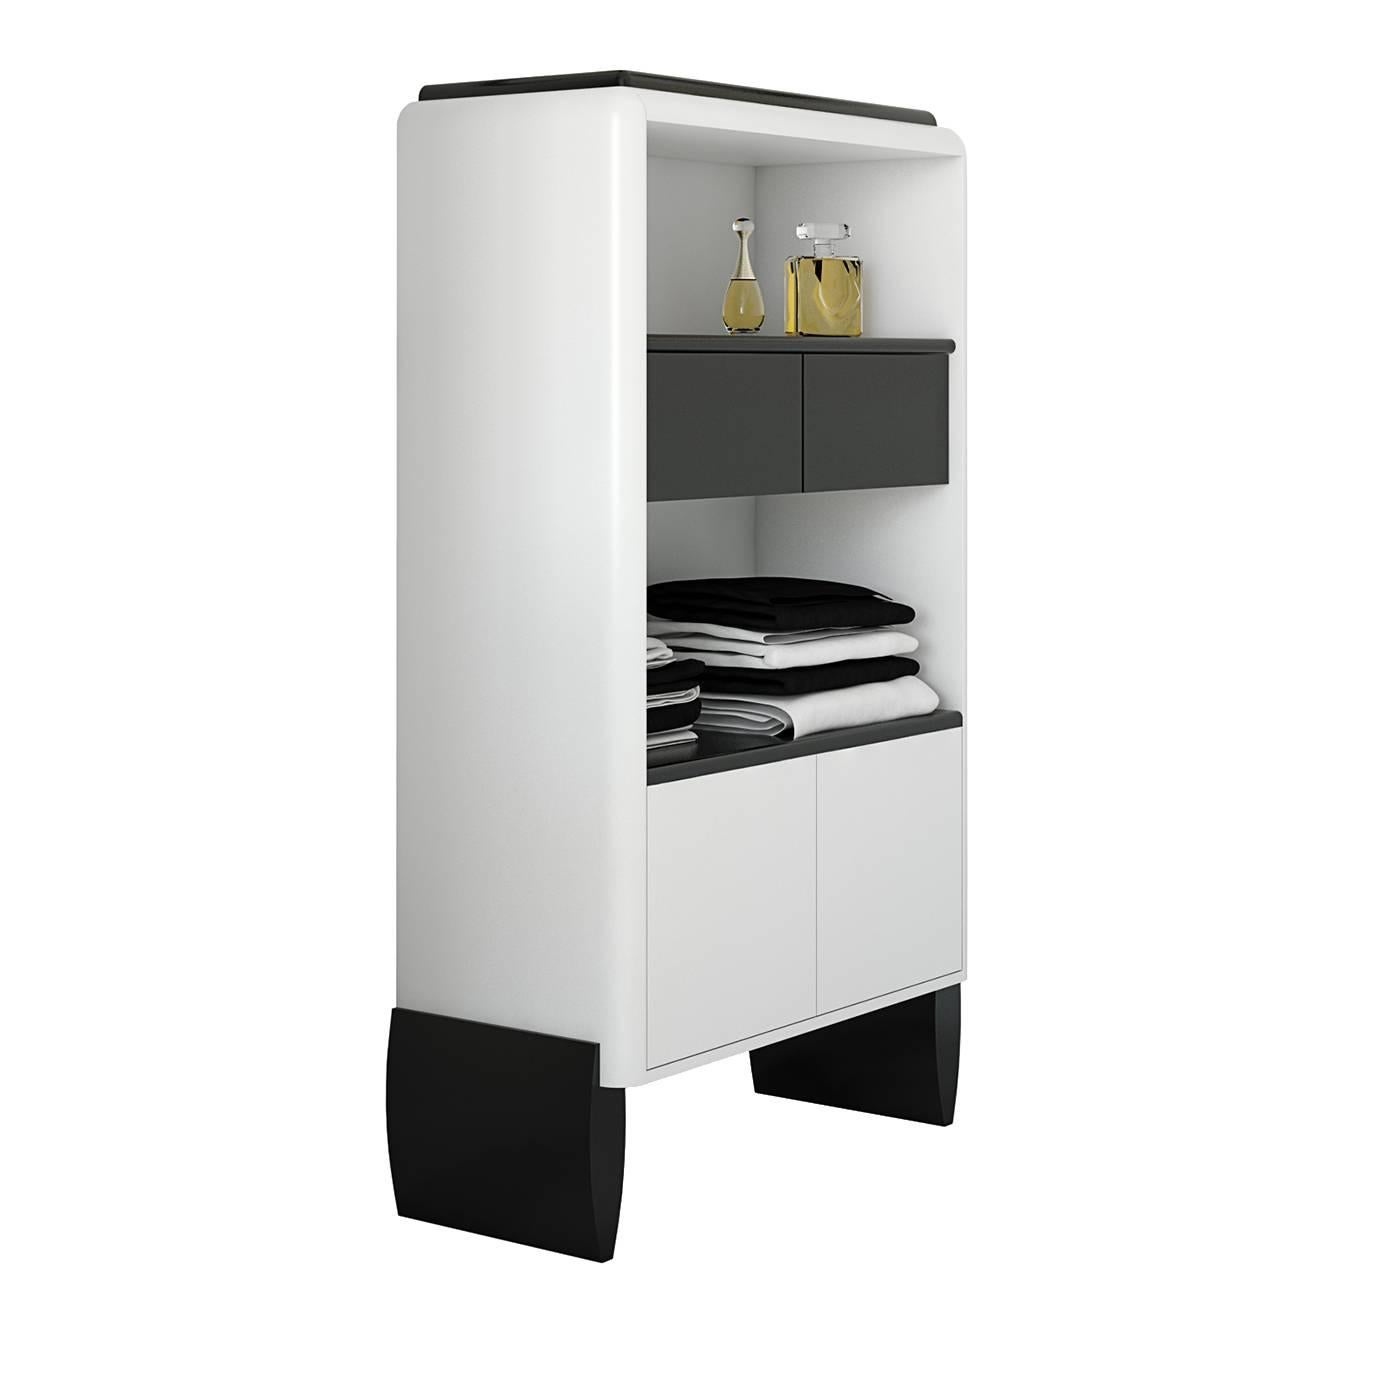 This striking cupboard is a versatile and precious addition to a modern or contemporary decor. Inspired by the bold style of Art Deco furniture, it boasts a matte white and black finish that create a timeless color combination. Standing on four